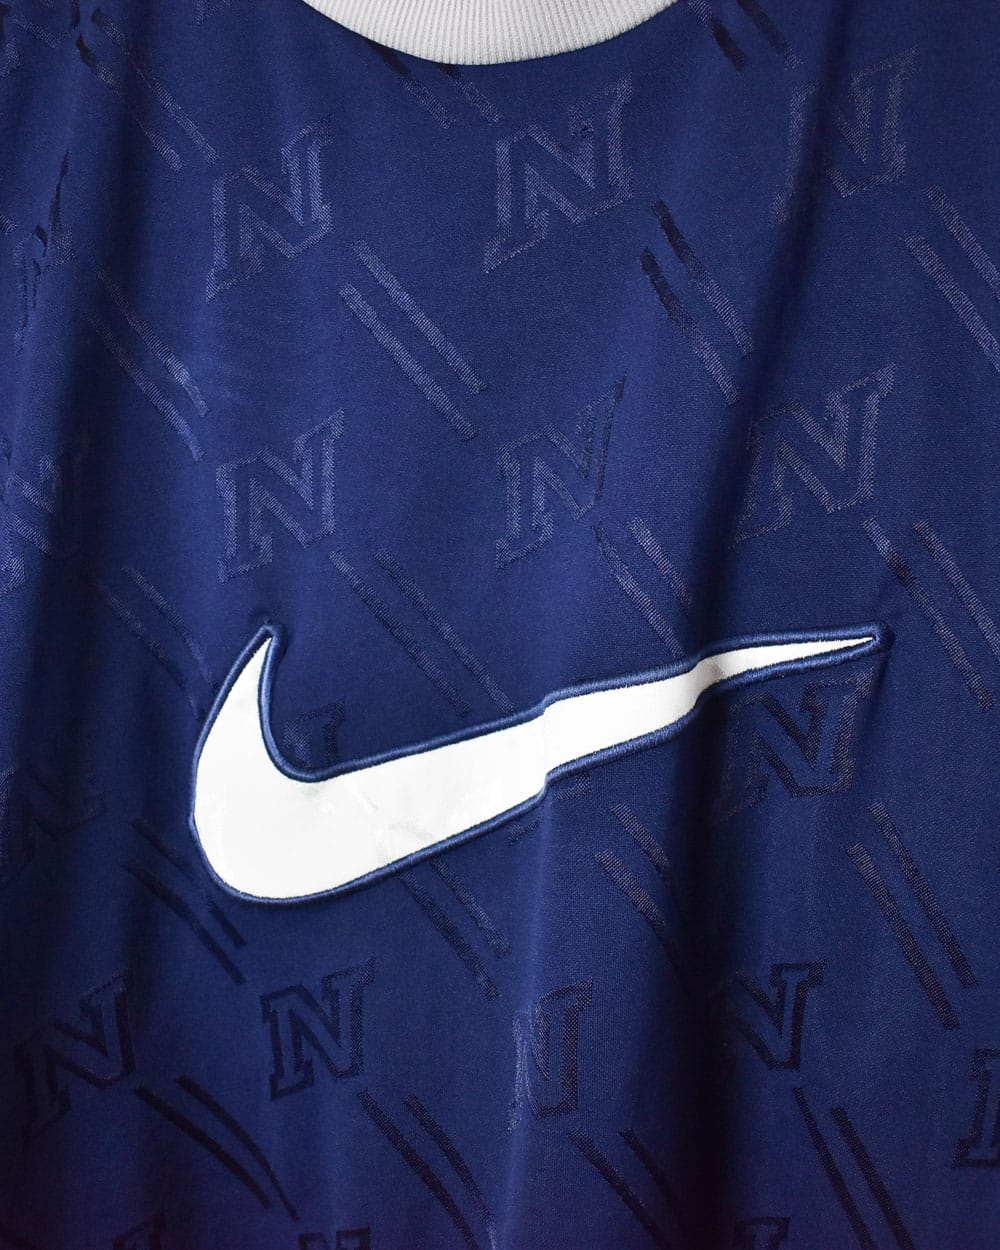 Navy Nike All Over Print T-Shirt - X-Large